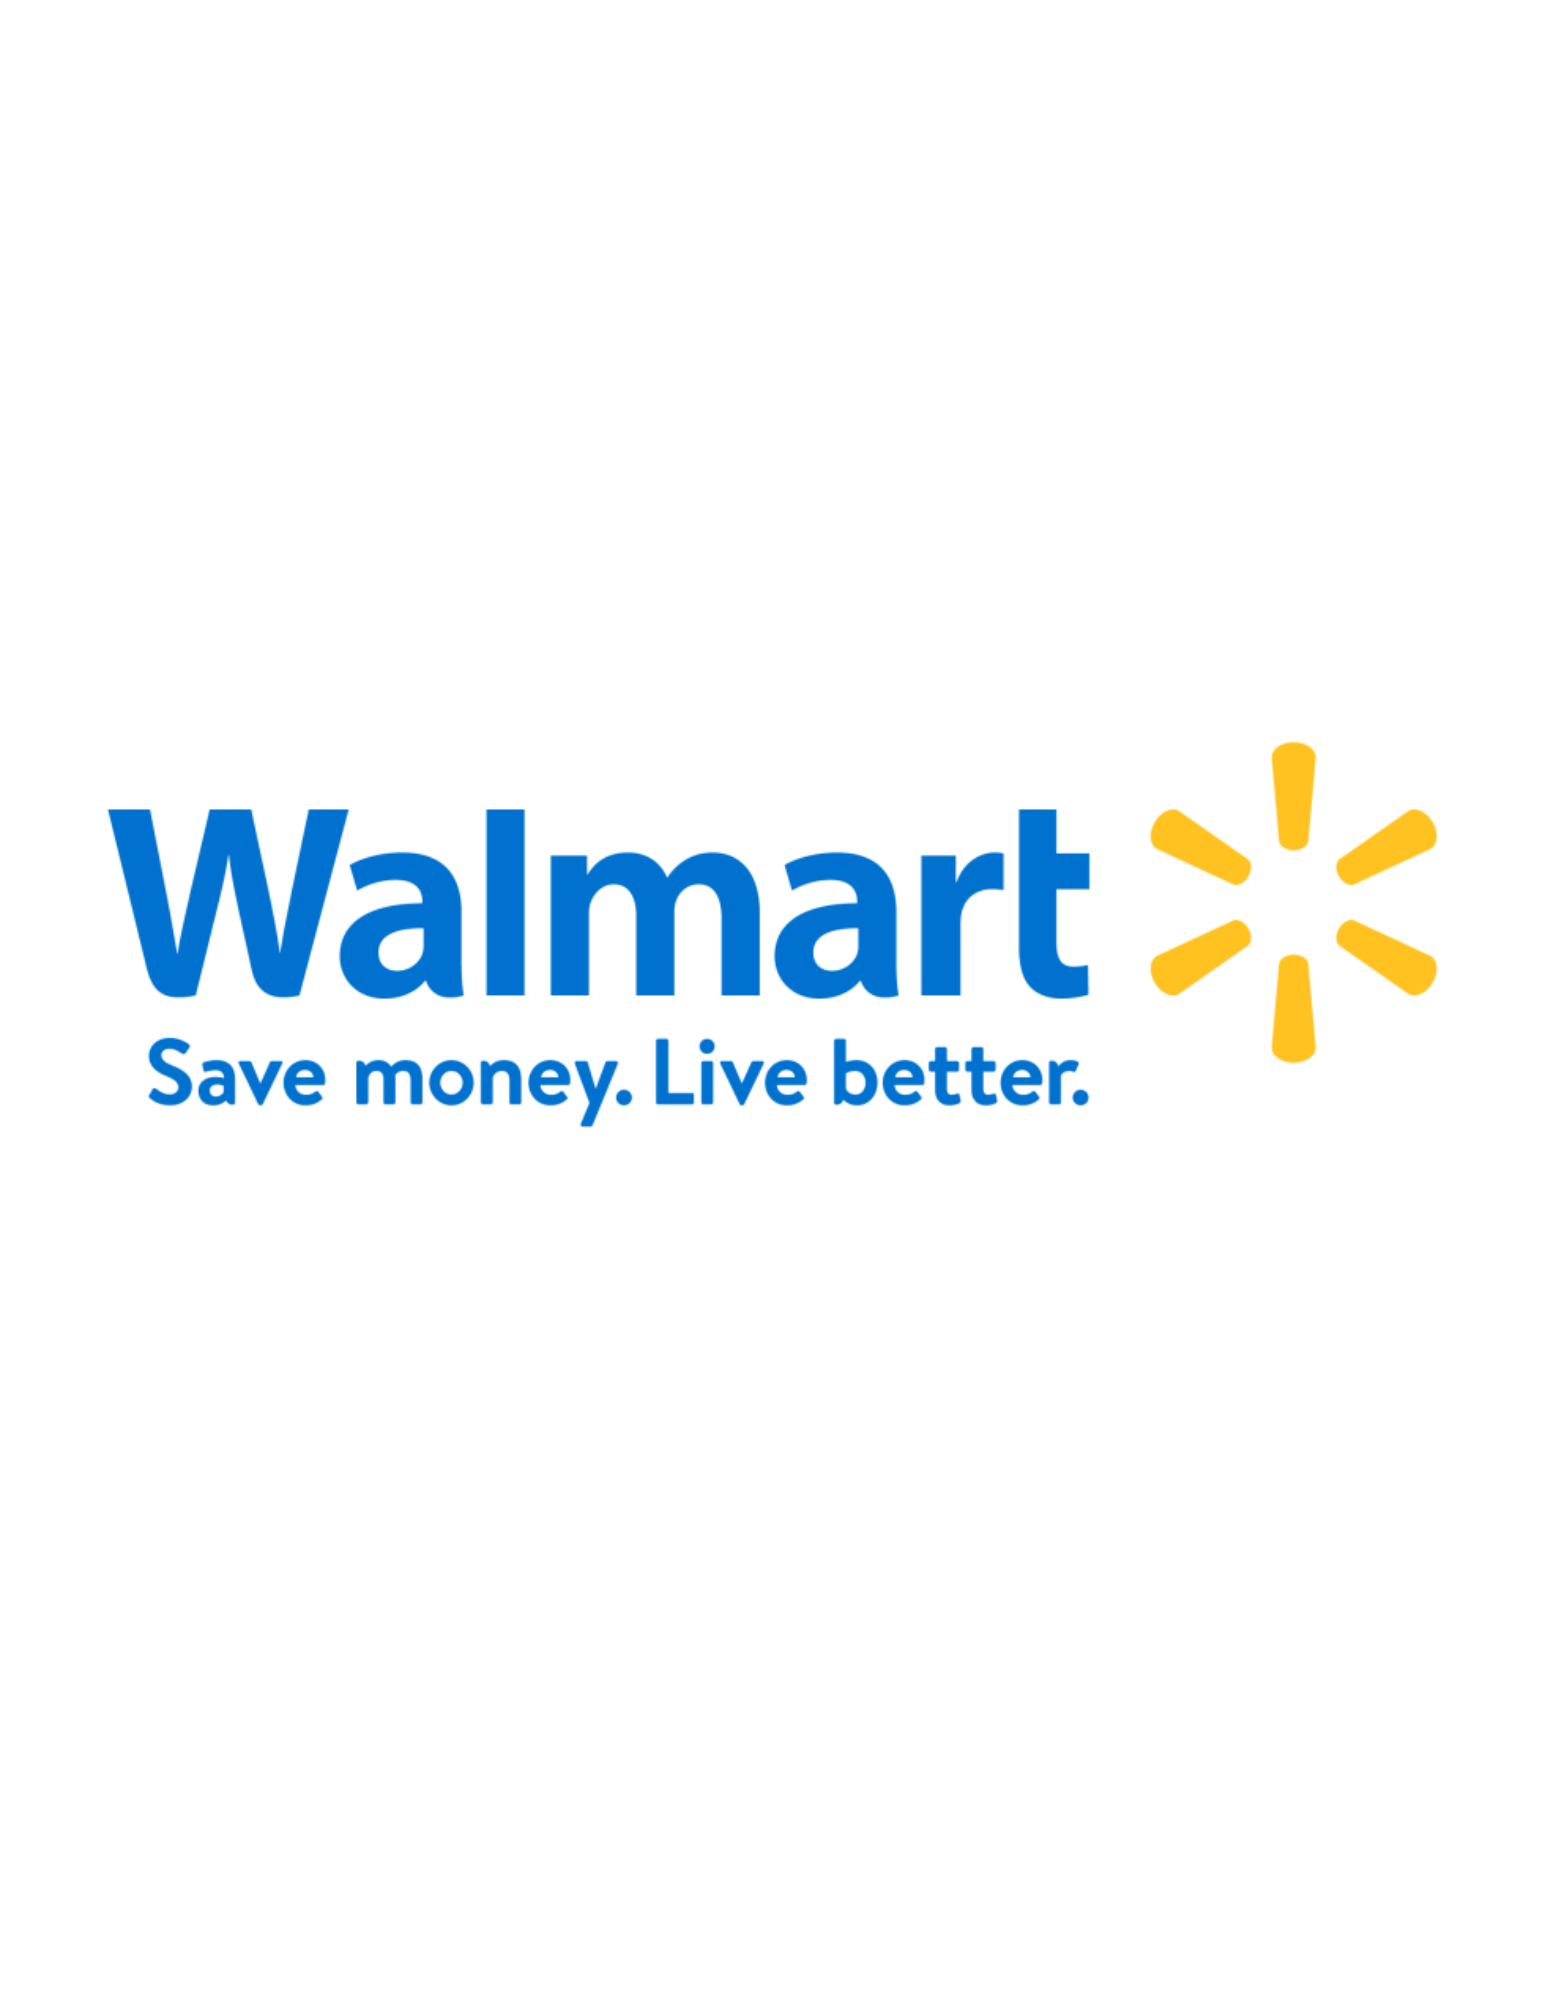 Yoodli can help you prepare for your upcoming Walmart interview.